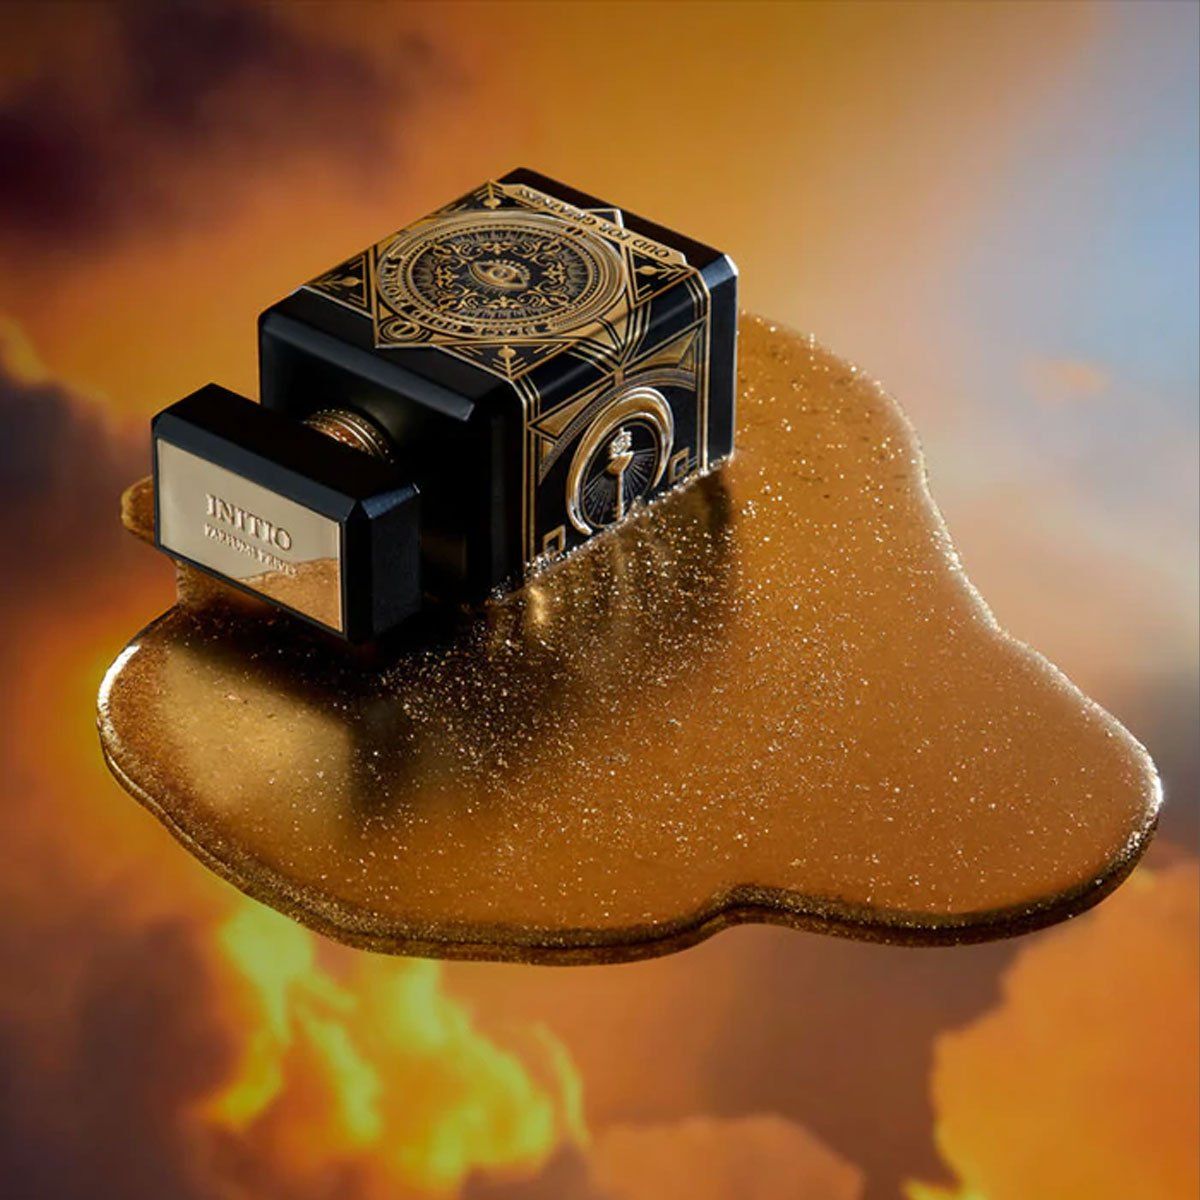  Initio Parfums Prives Oud for Greatness 